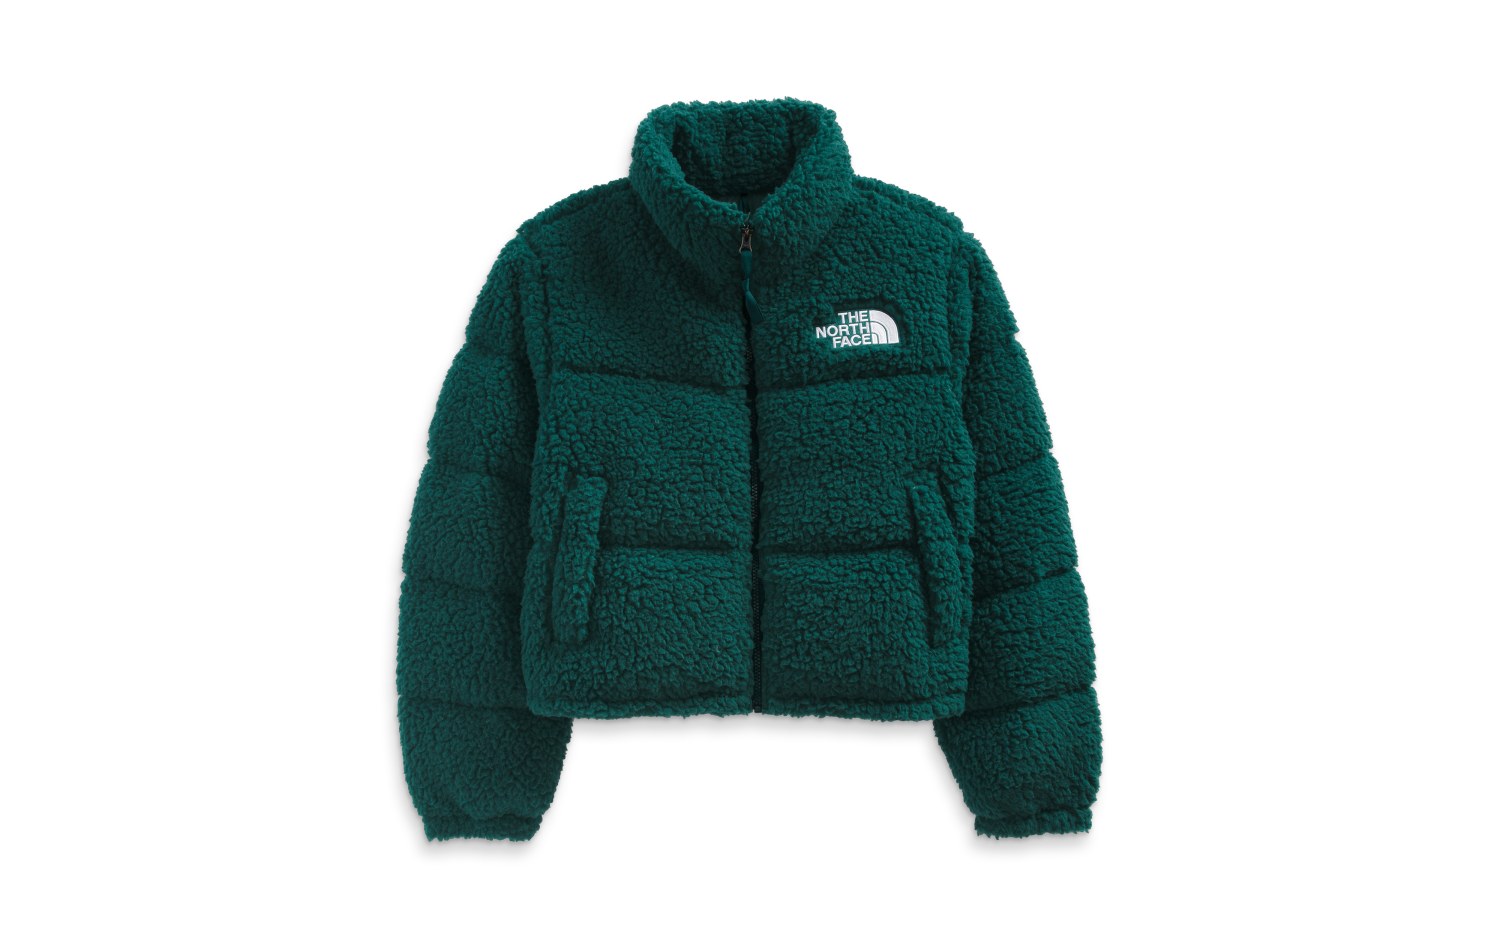 The North Face is renaming its fleece jackets and spotlighting the